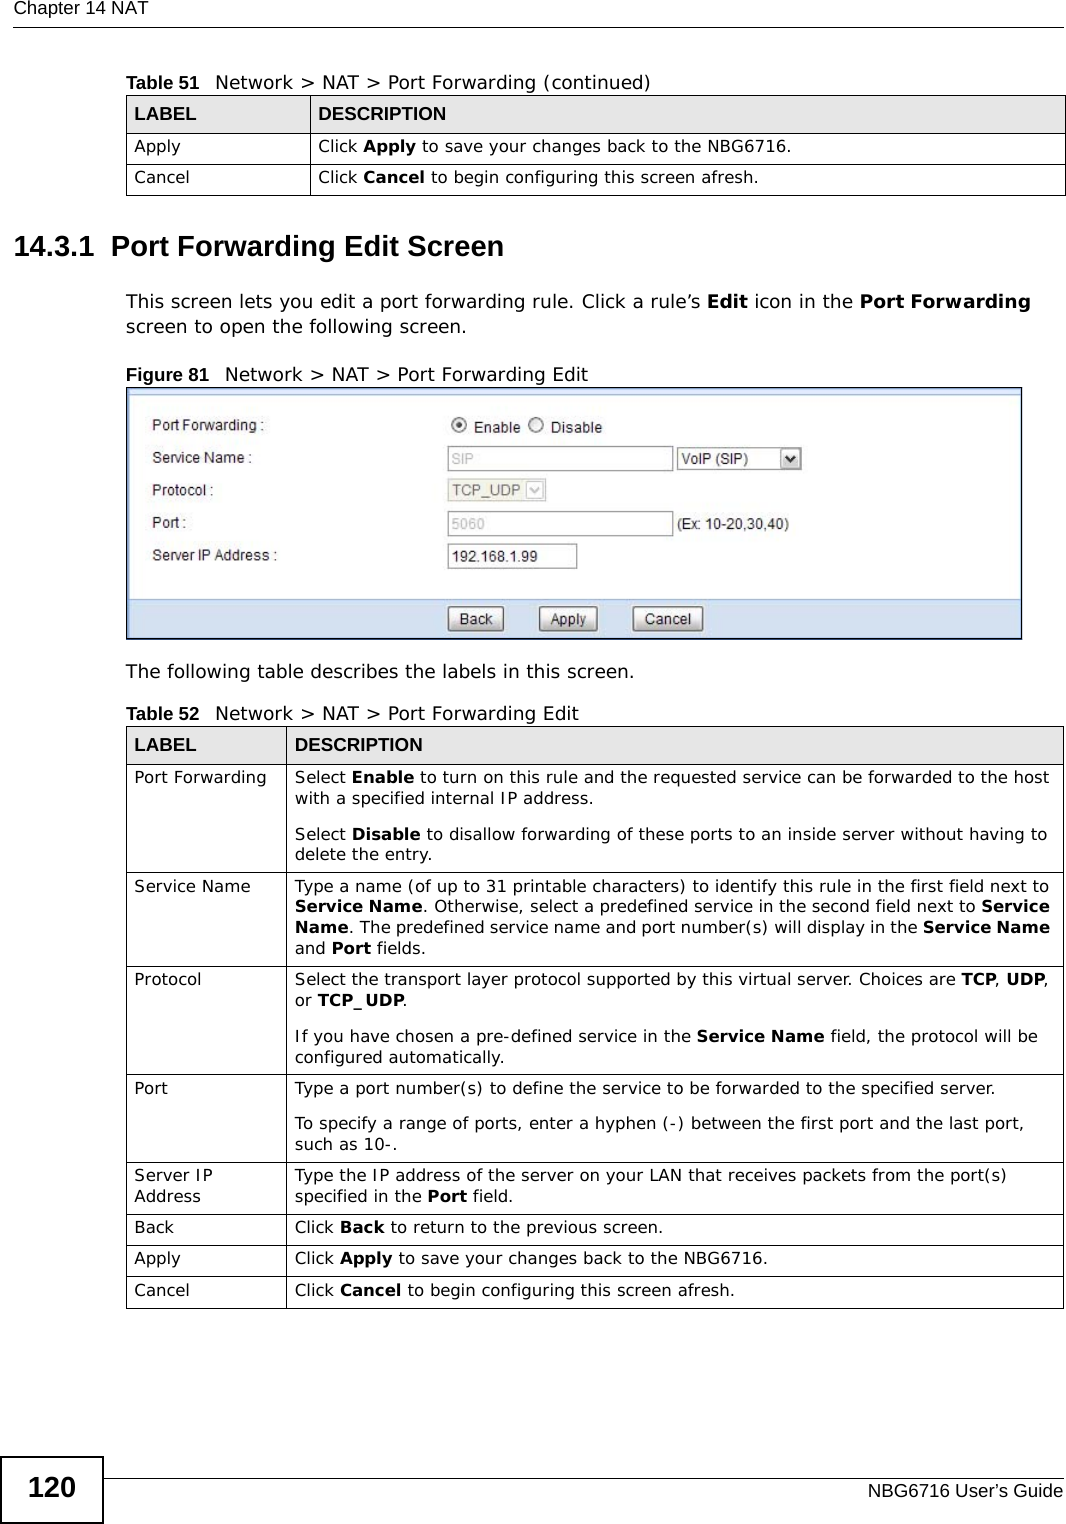 Chapter 14 NATNBG6716 User’s Guide12014.3.1  Port Forwarding Edit Screen This screen lets you edit a port forwarding rule. Click a rule’s Edit icon in the Port Forwarding screen to open the following screen.Figure 81   Network &gt; NAT &gt; Port Forwarding Edit The following table describes the labels in this screen. Apply Click Apply to save your changes back to the NBG6716.Cancel Click Cancel to begin configuring this screen afresh.Table 51   Network &gt; NAT &gt; Port Forwarding (continued)LABEL DESCRIPTIONTable 52   Network &gt; NAT &gt; Port Forwarding EditLABEL DESCRIPTIONPort Forwarding Select Enable to turn on this rule and the requested service can be forwarded to the host with a specified internal IP address.Select Disable to disallow forwarding of these ports to an inside server without having to delete the entry. Service Name Type a name (of up to 31 printable characters) to identify this rule in the first field next to Service Name. Otherwise, select a predefined service in the second field next to Service Name. The predefined service name and port number(s) will display in the Service Name and Port fields.Protocol Select the transport layer protocol supported by this virtual server. Choices are TCP, UDP, or TCP_UDP. If you have chosen a pre-defined service in the Service Name field, the protocol will be configured automatically.Port Type a port number(s) to define the service to be forwarded to the specified server.To specify a range of ports, enter a hyphen (-) between the first port and the last port, such as 10-.Server IP Address Type the IP address of the server on your LAN that receives packets from the port(s) specified in the Port field.Back Click Back to return to the previous screen.Apply Click Apply to save your changes back to the NBG6716.Cancel Click Cancel to begin configuring this screen afresh.